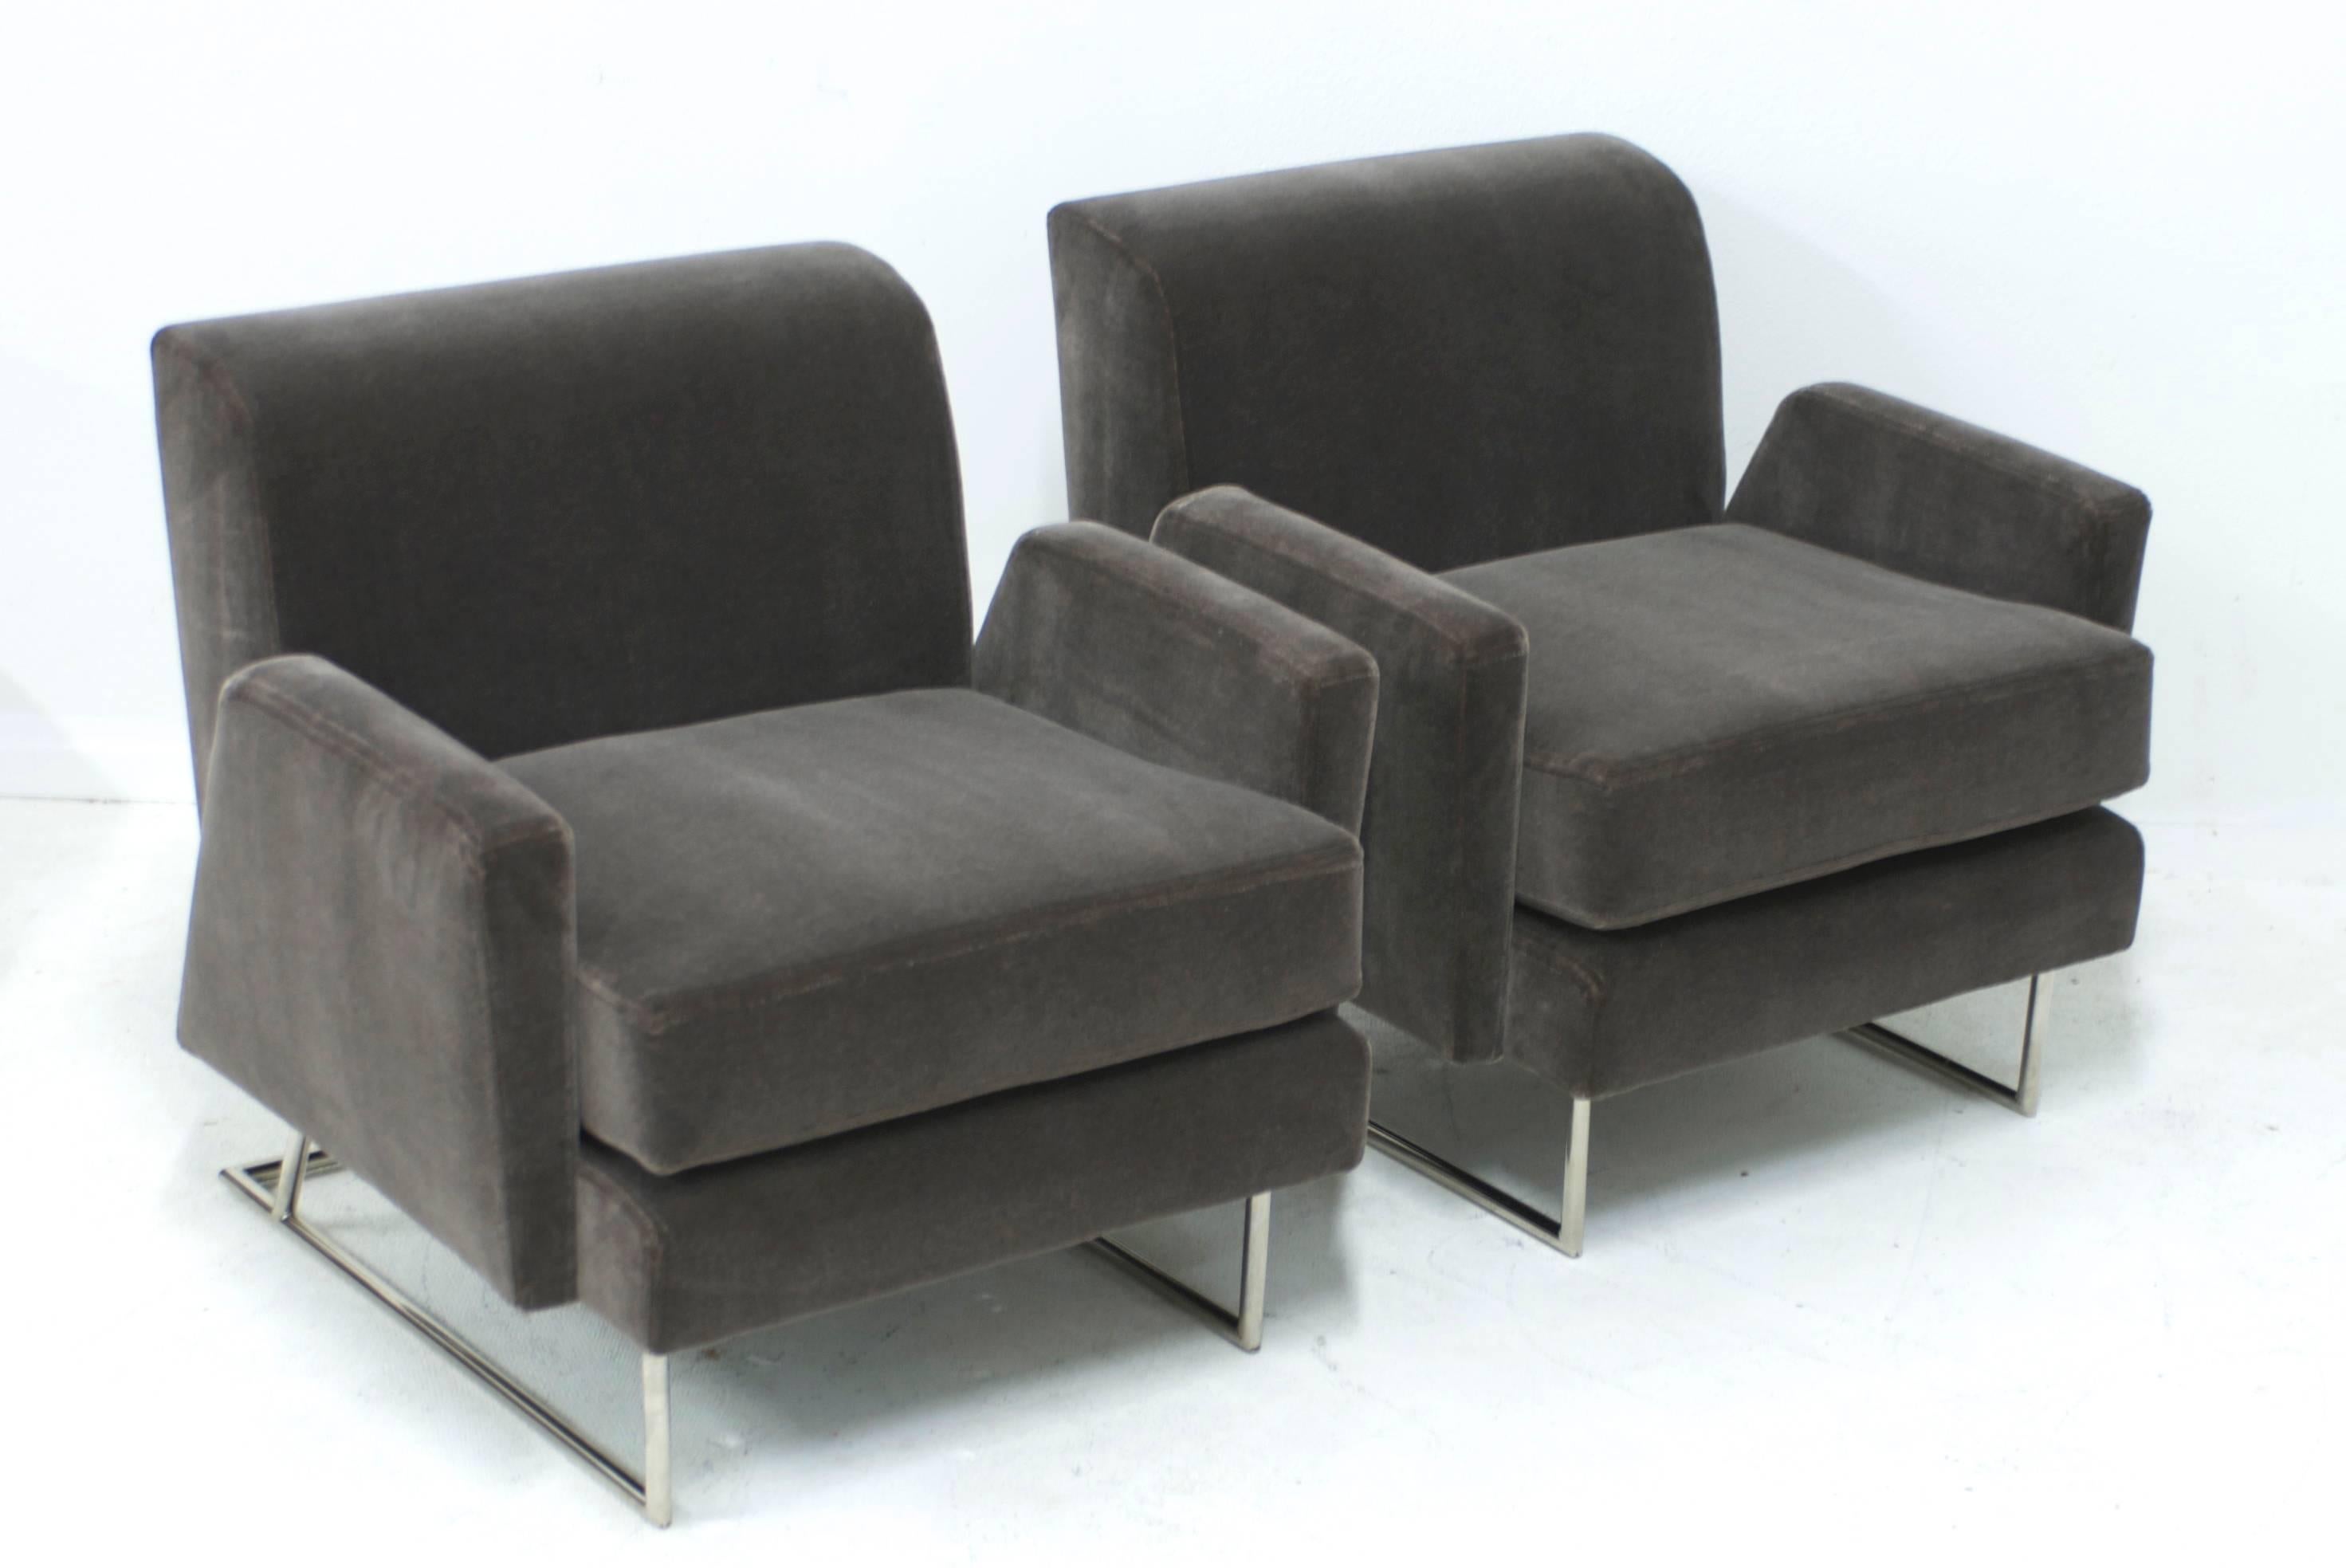 North American Pair of Lounge Chairs in Chocolate Taupe Mohair